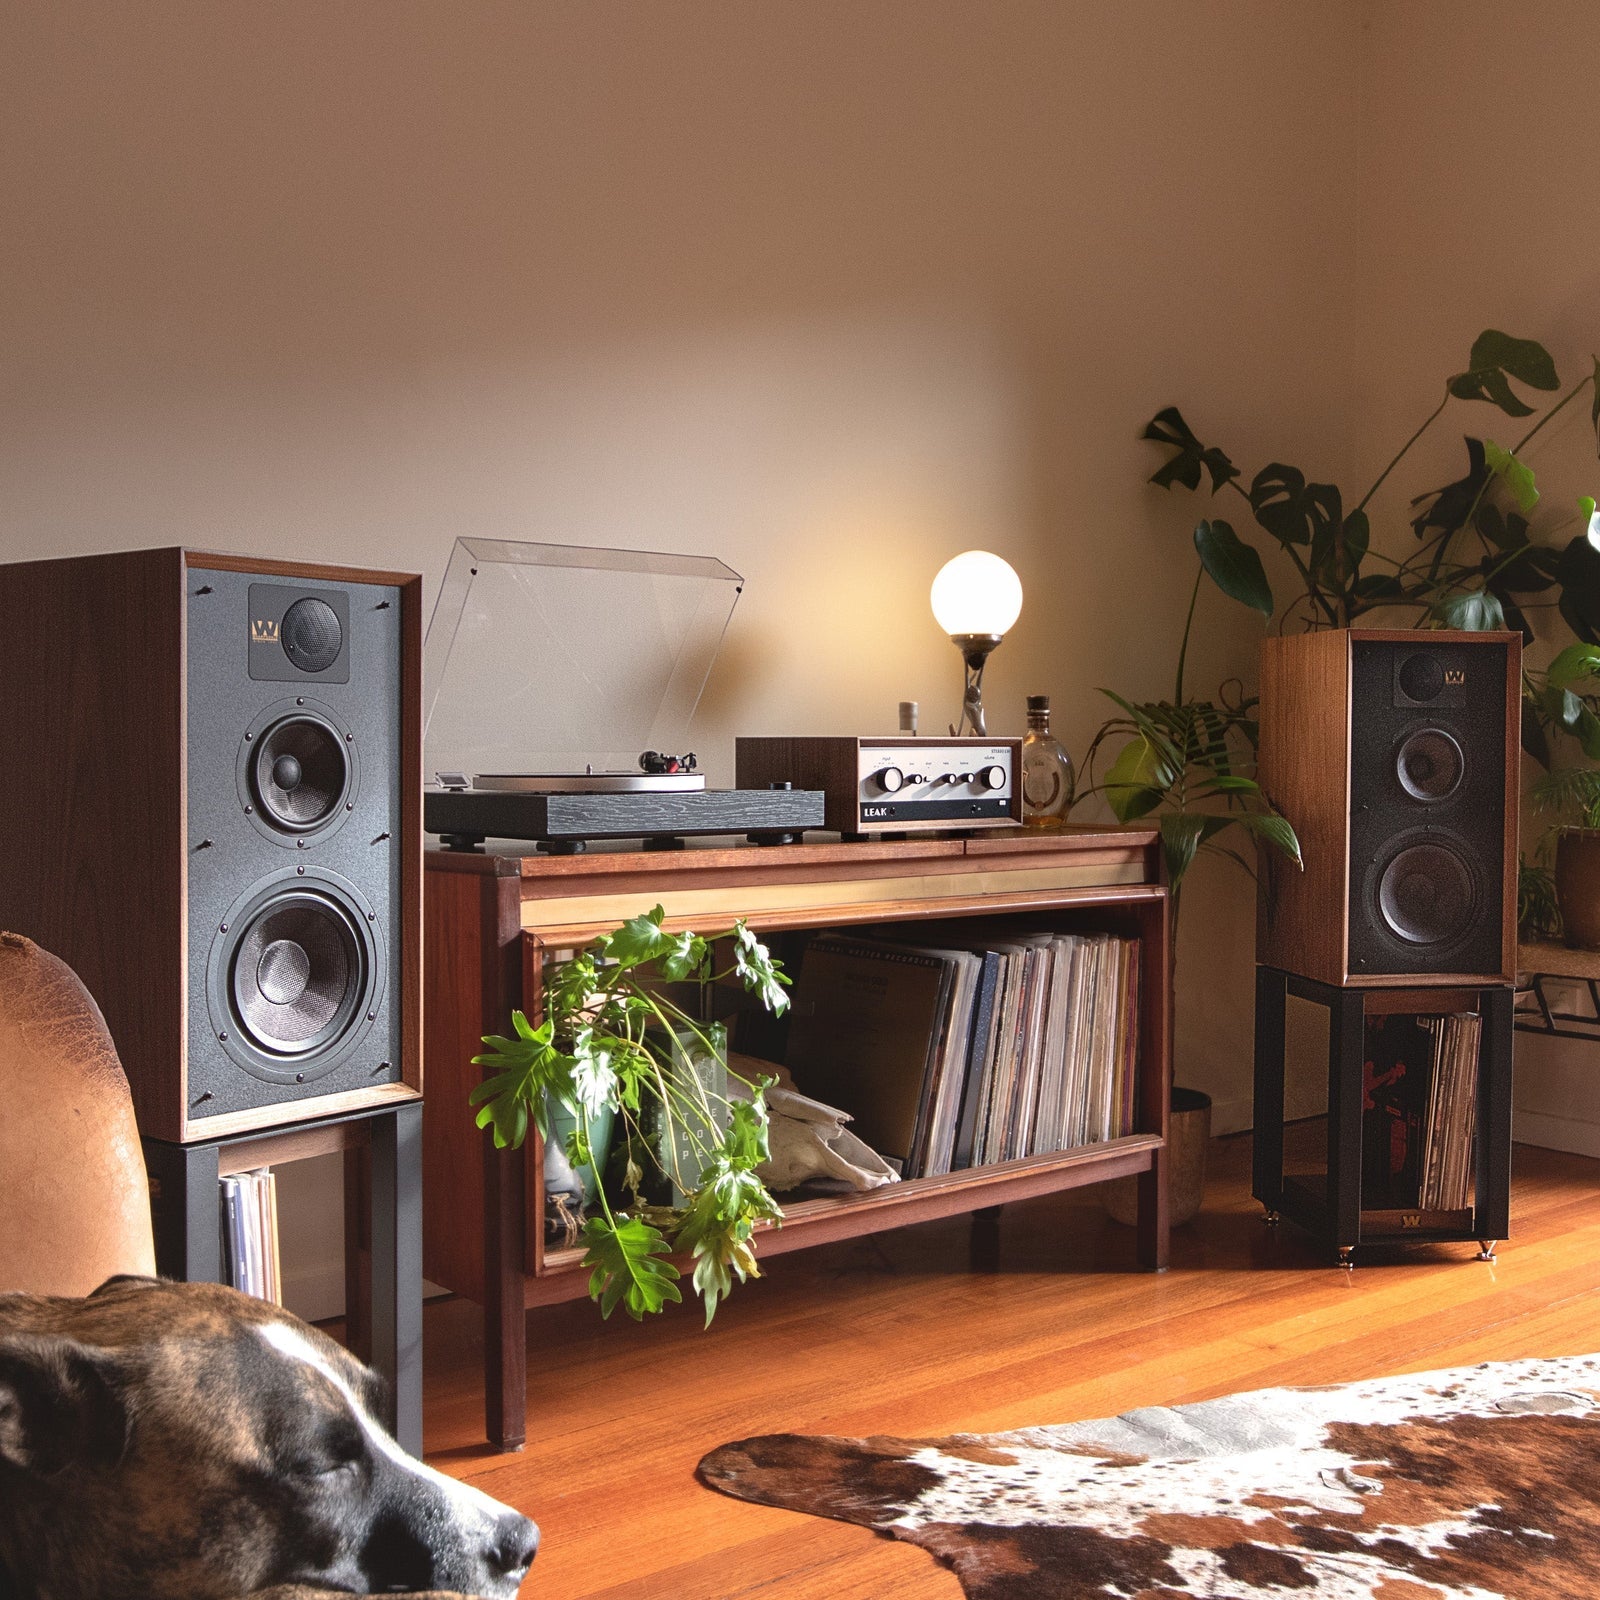 Wharfedale LINTON Heritage Speakers With Dual turntable and Leak stereo in listening room. 